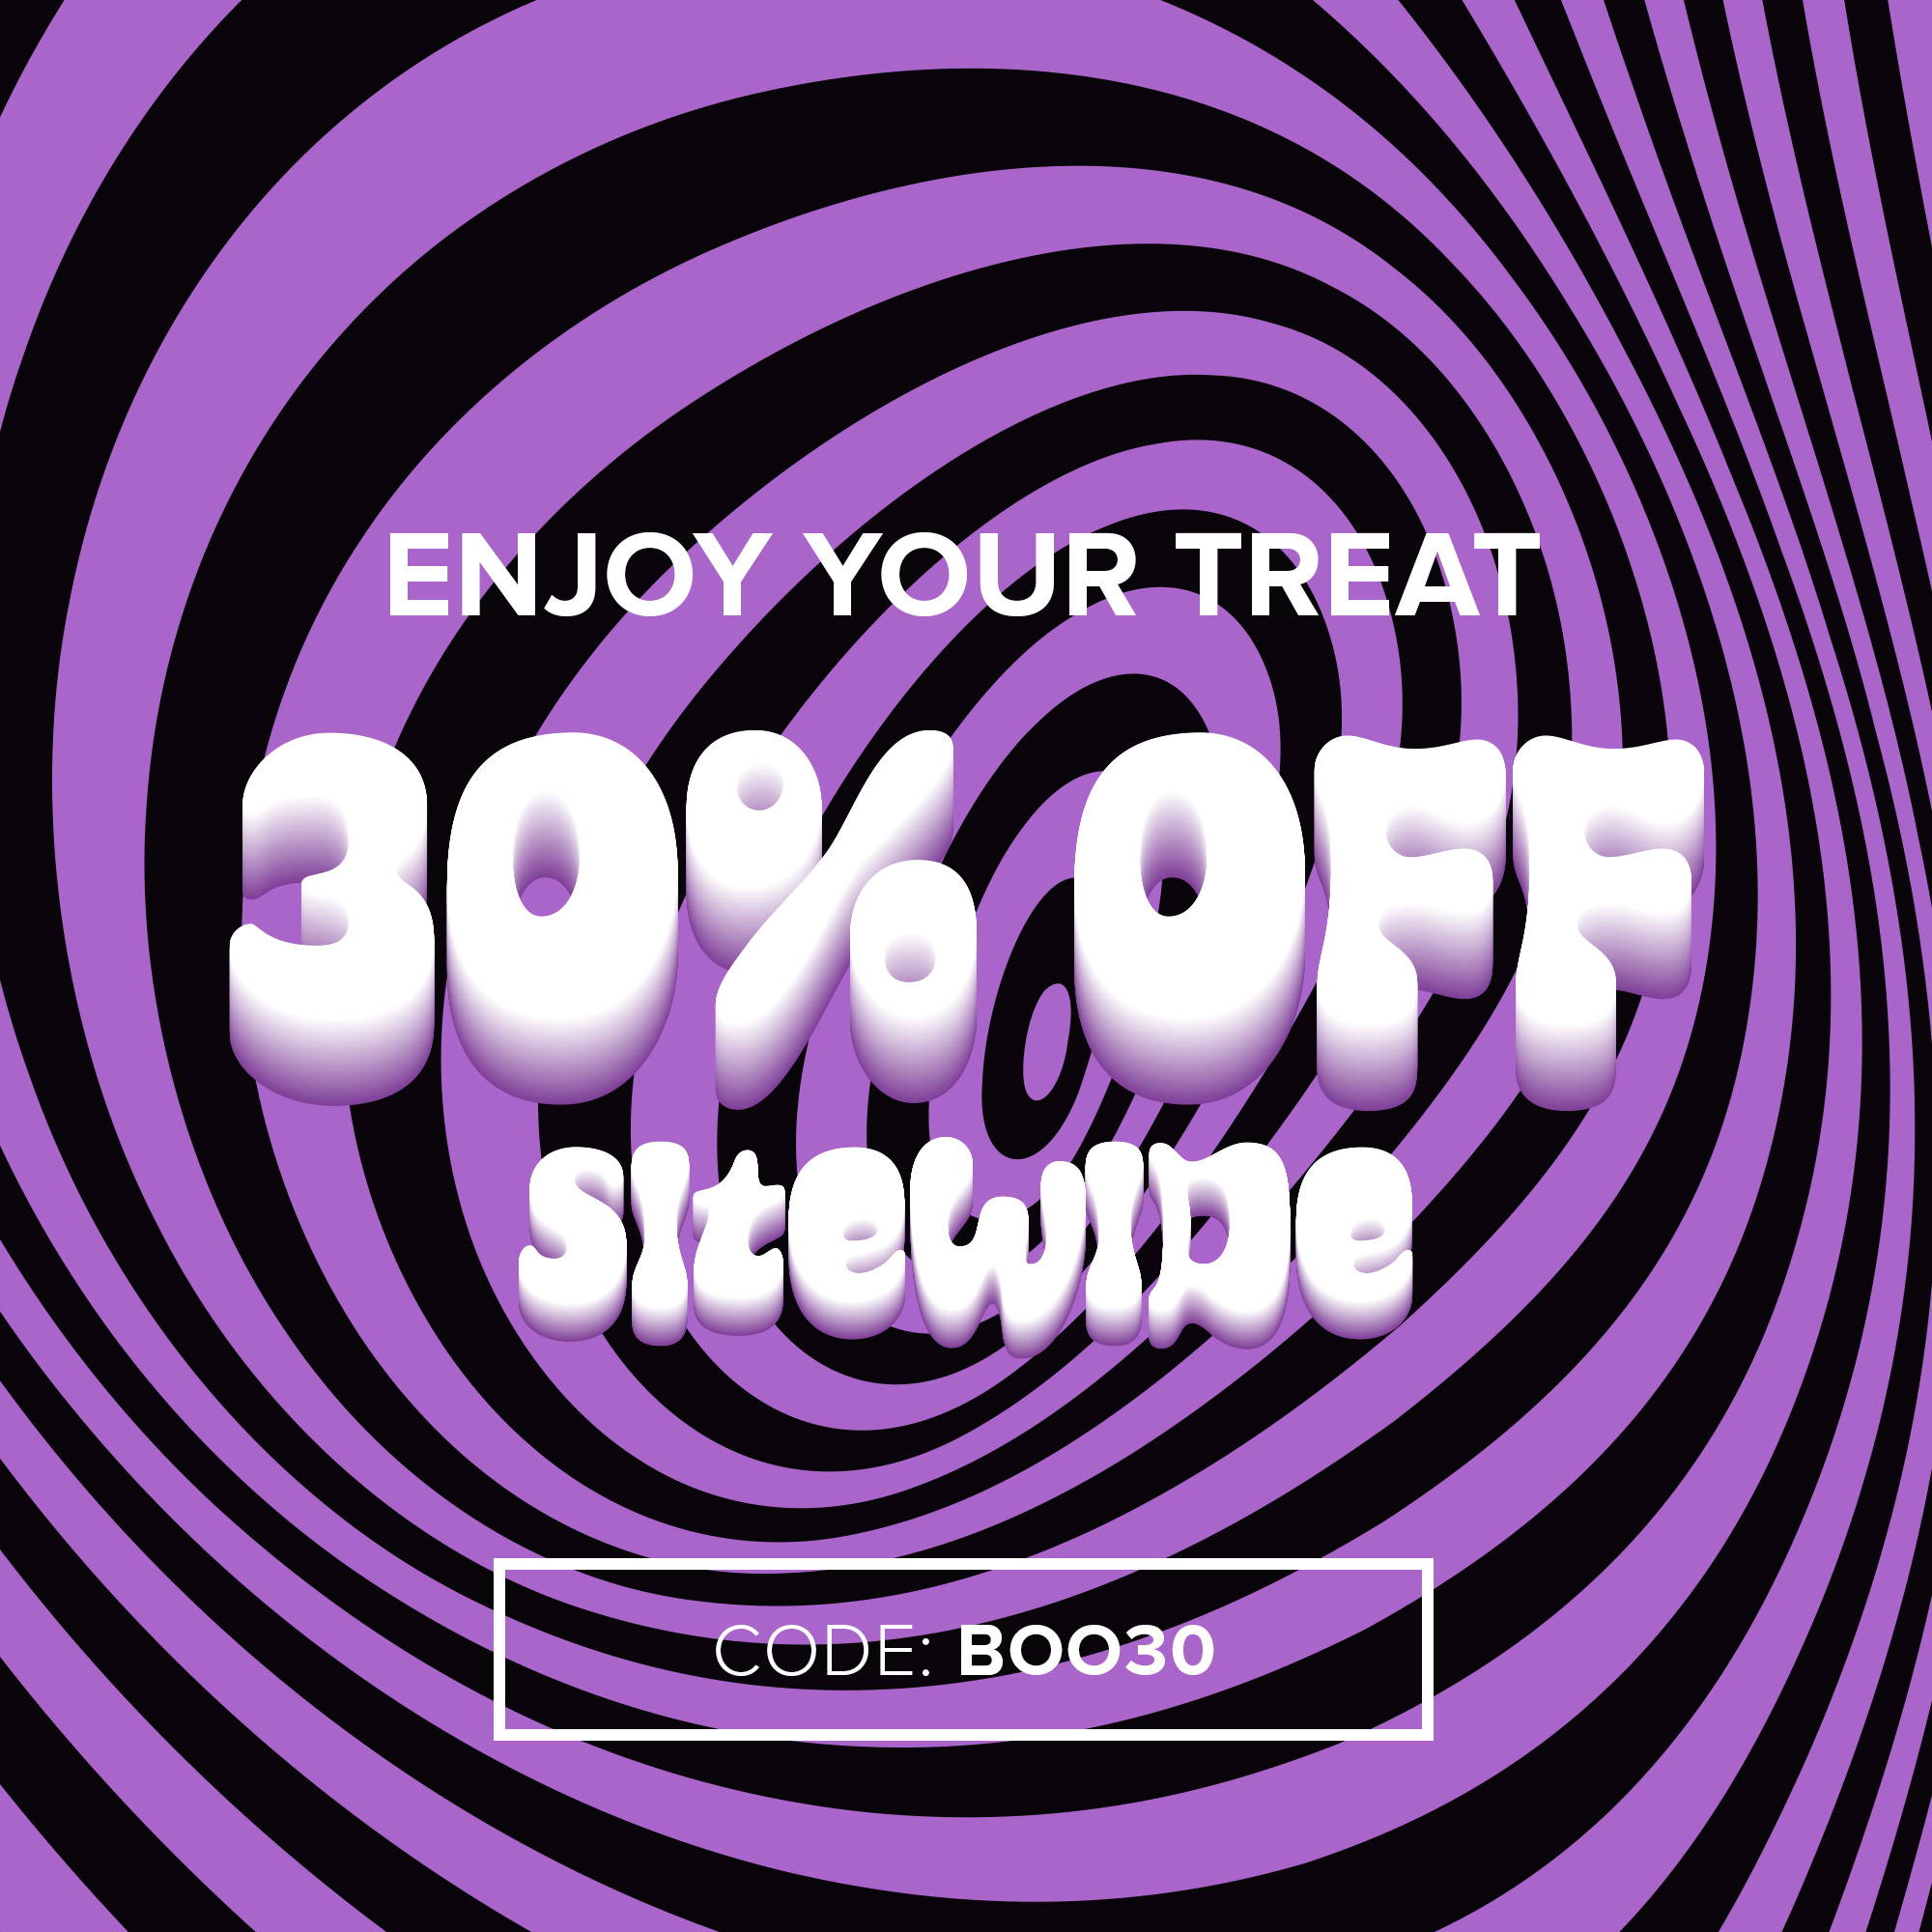 30% off sitewide with code: BOO30